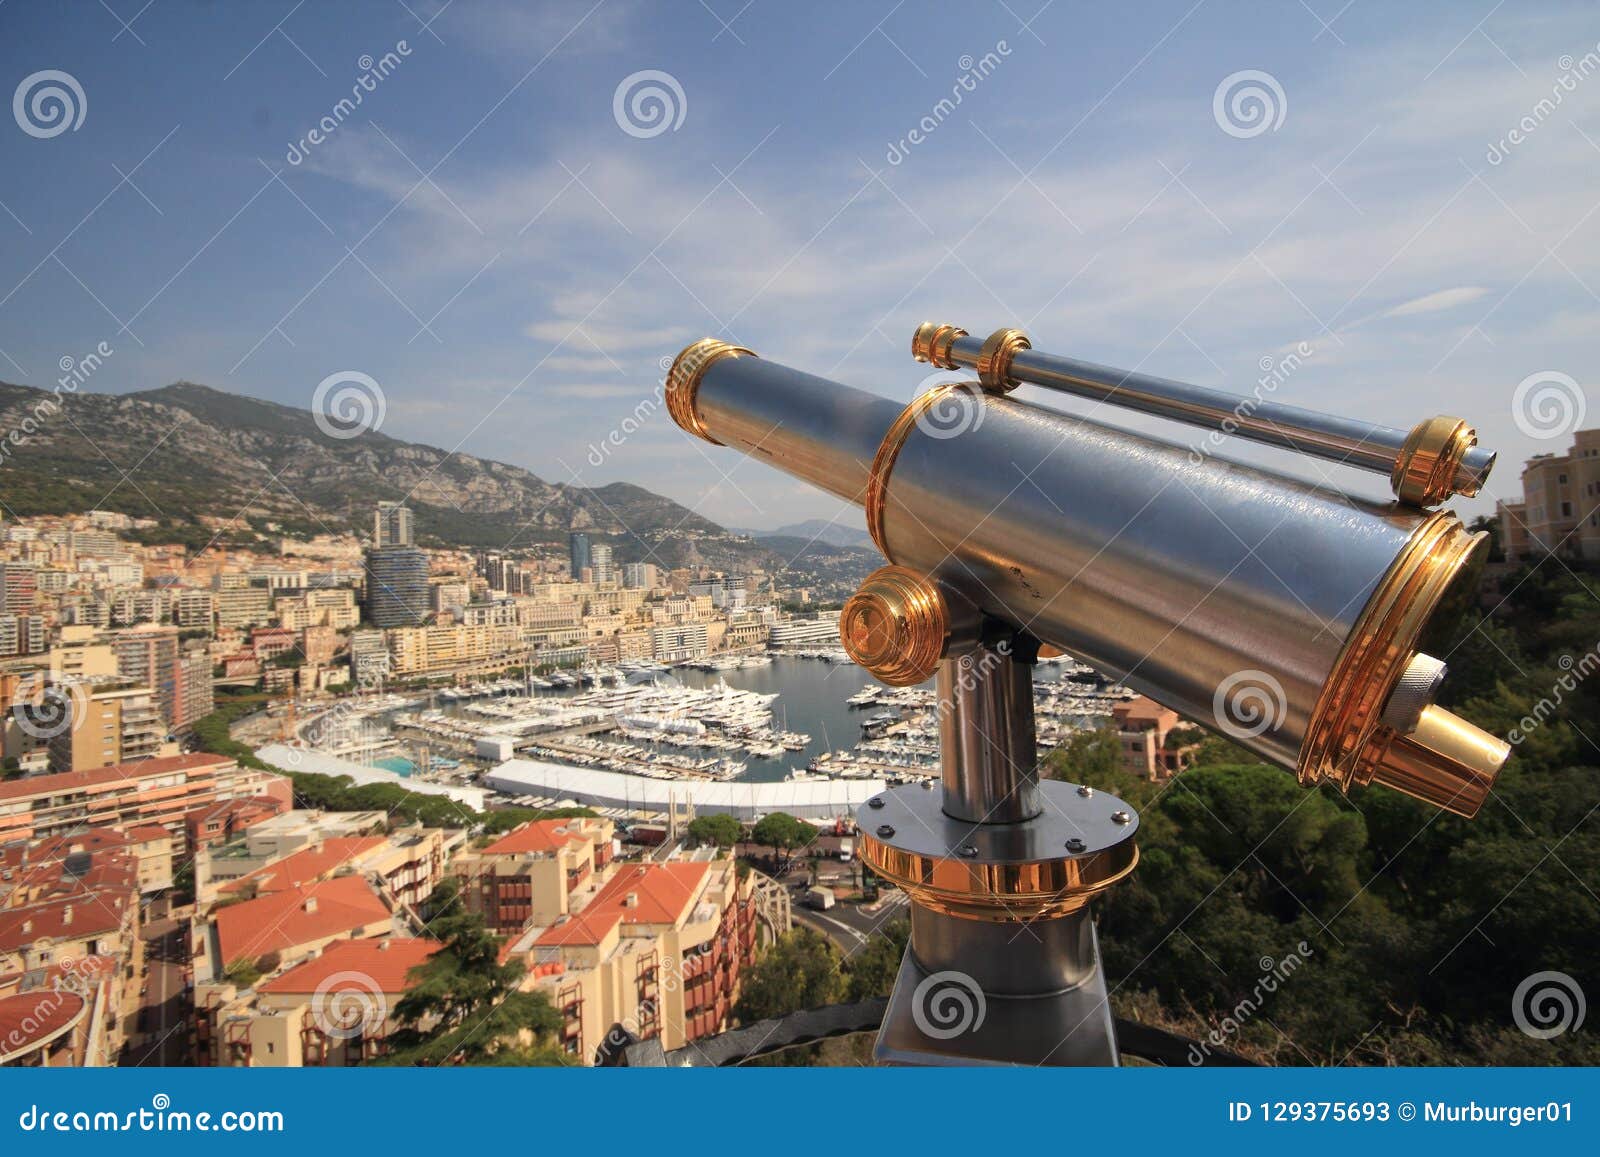 monaco a rich tax haven in the mediterranean with a telescope